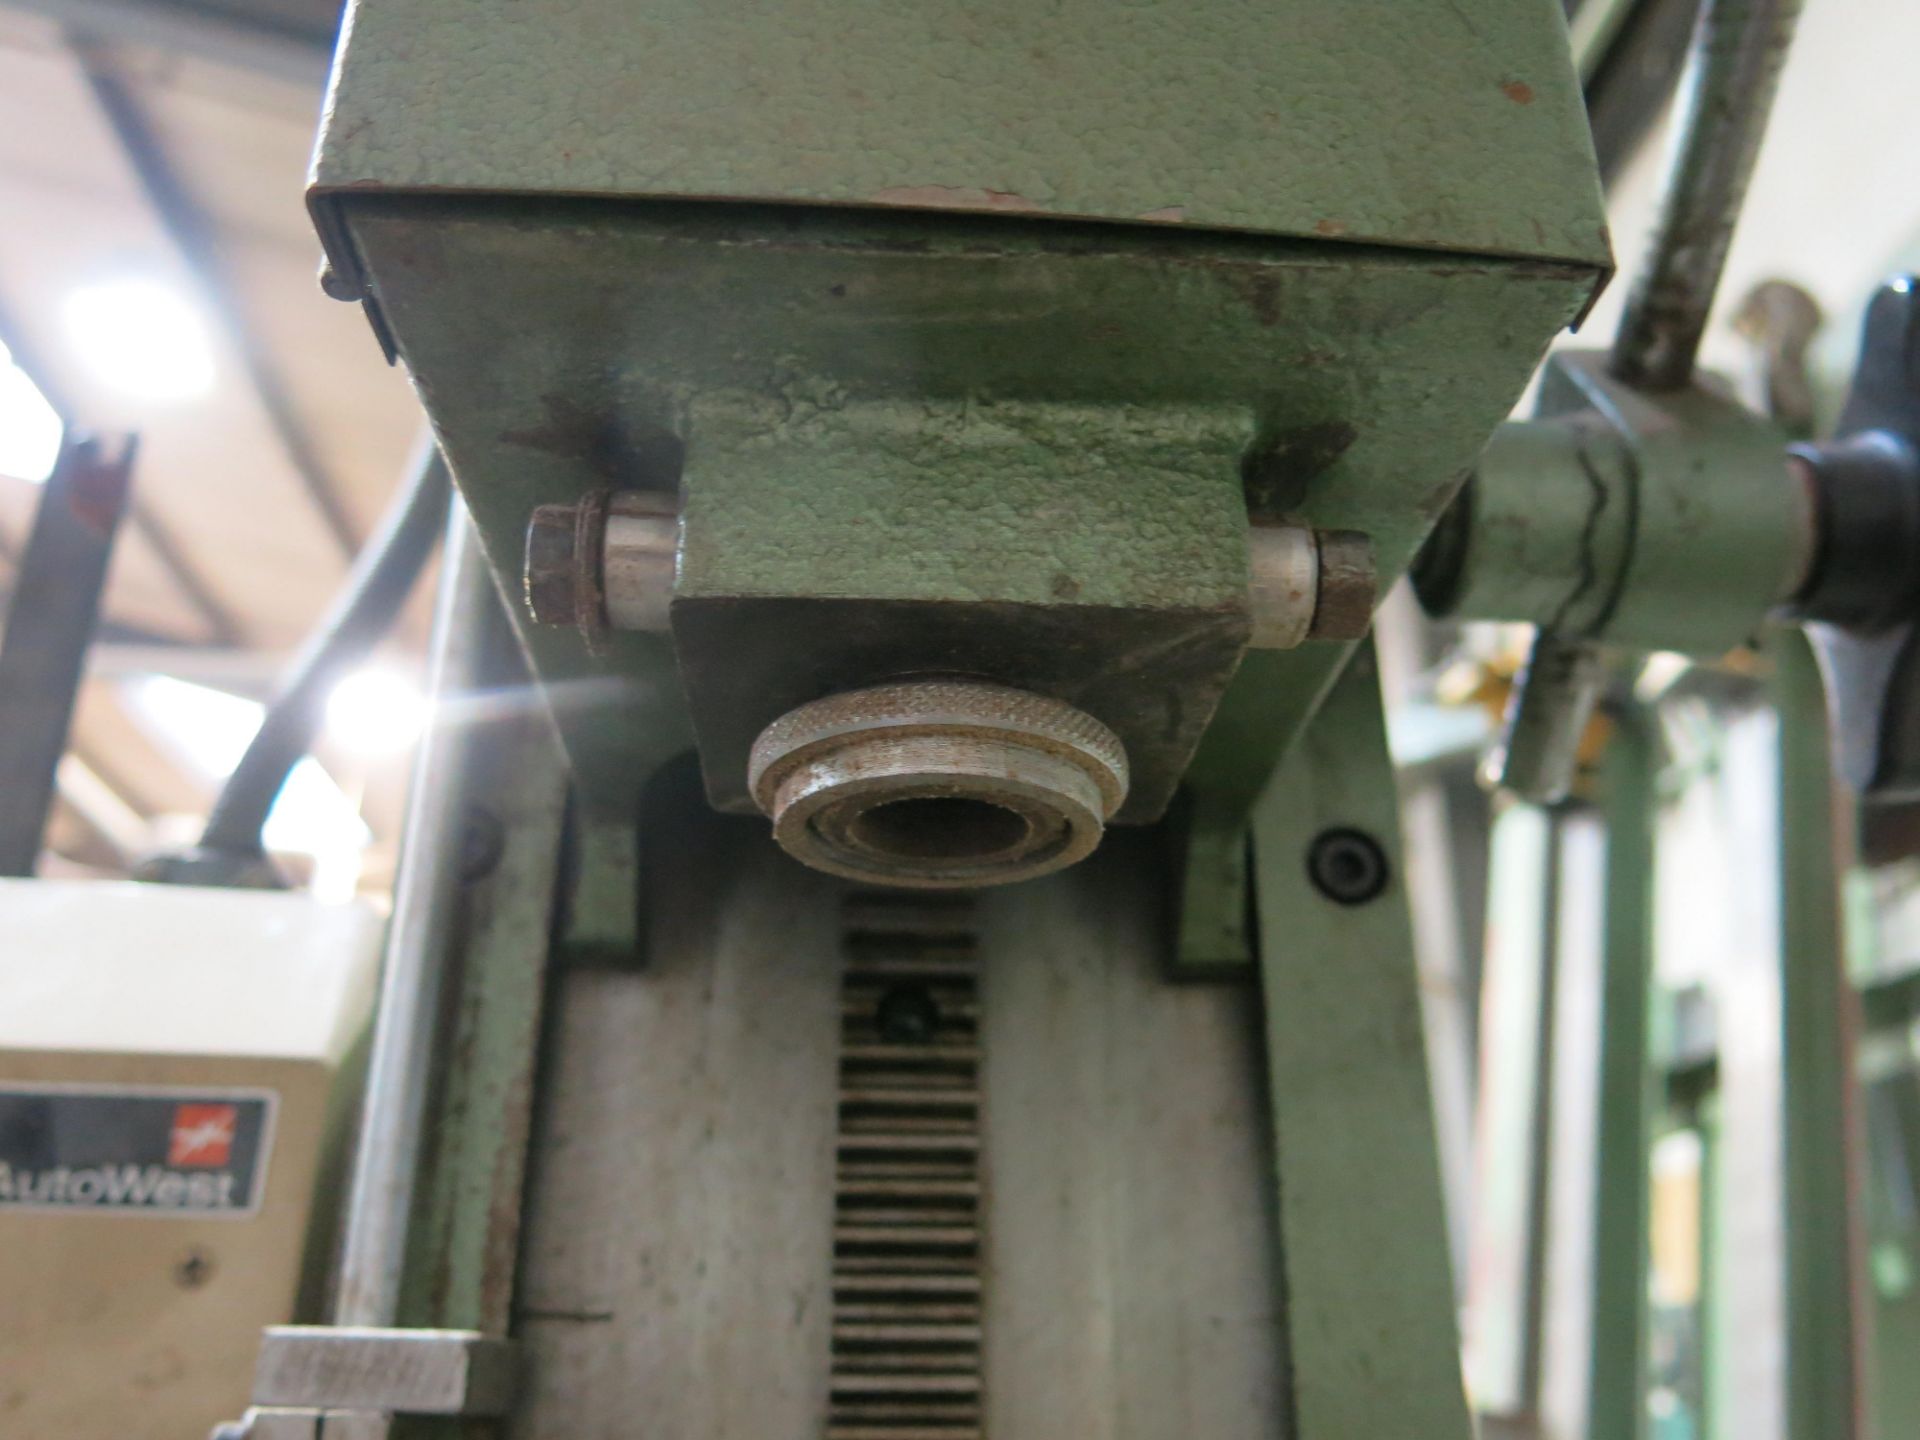 * Multico Morticer Model M3, serial number 12067 (no tooling), 230V single phase. Please note this - Image 3 of 5